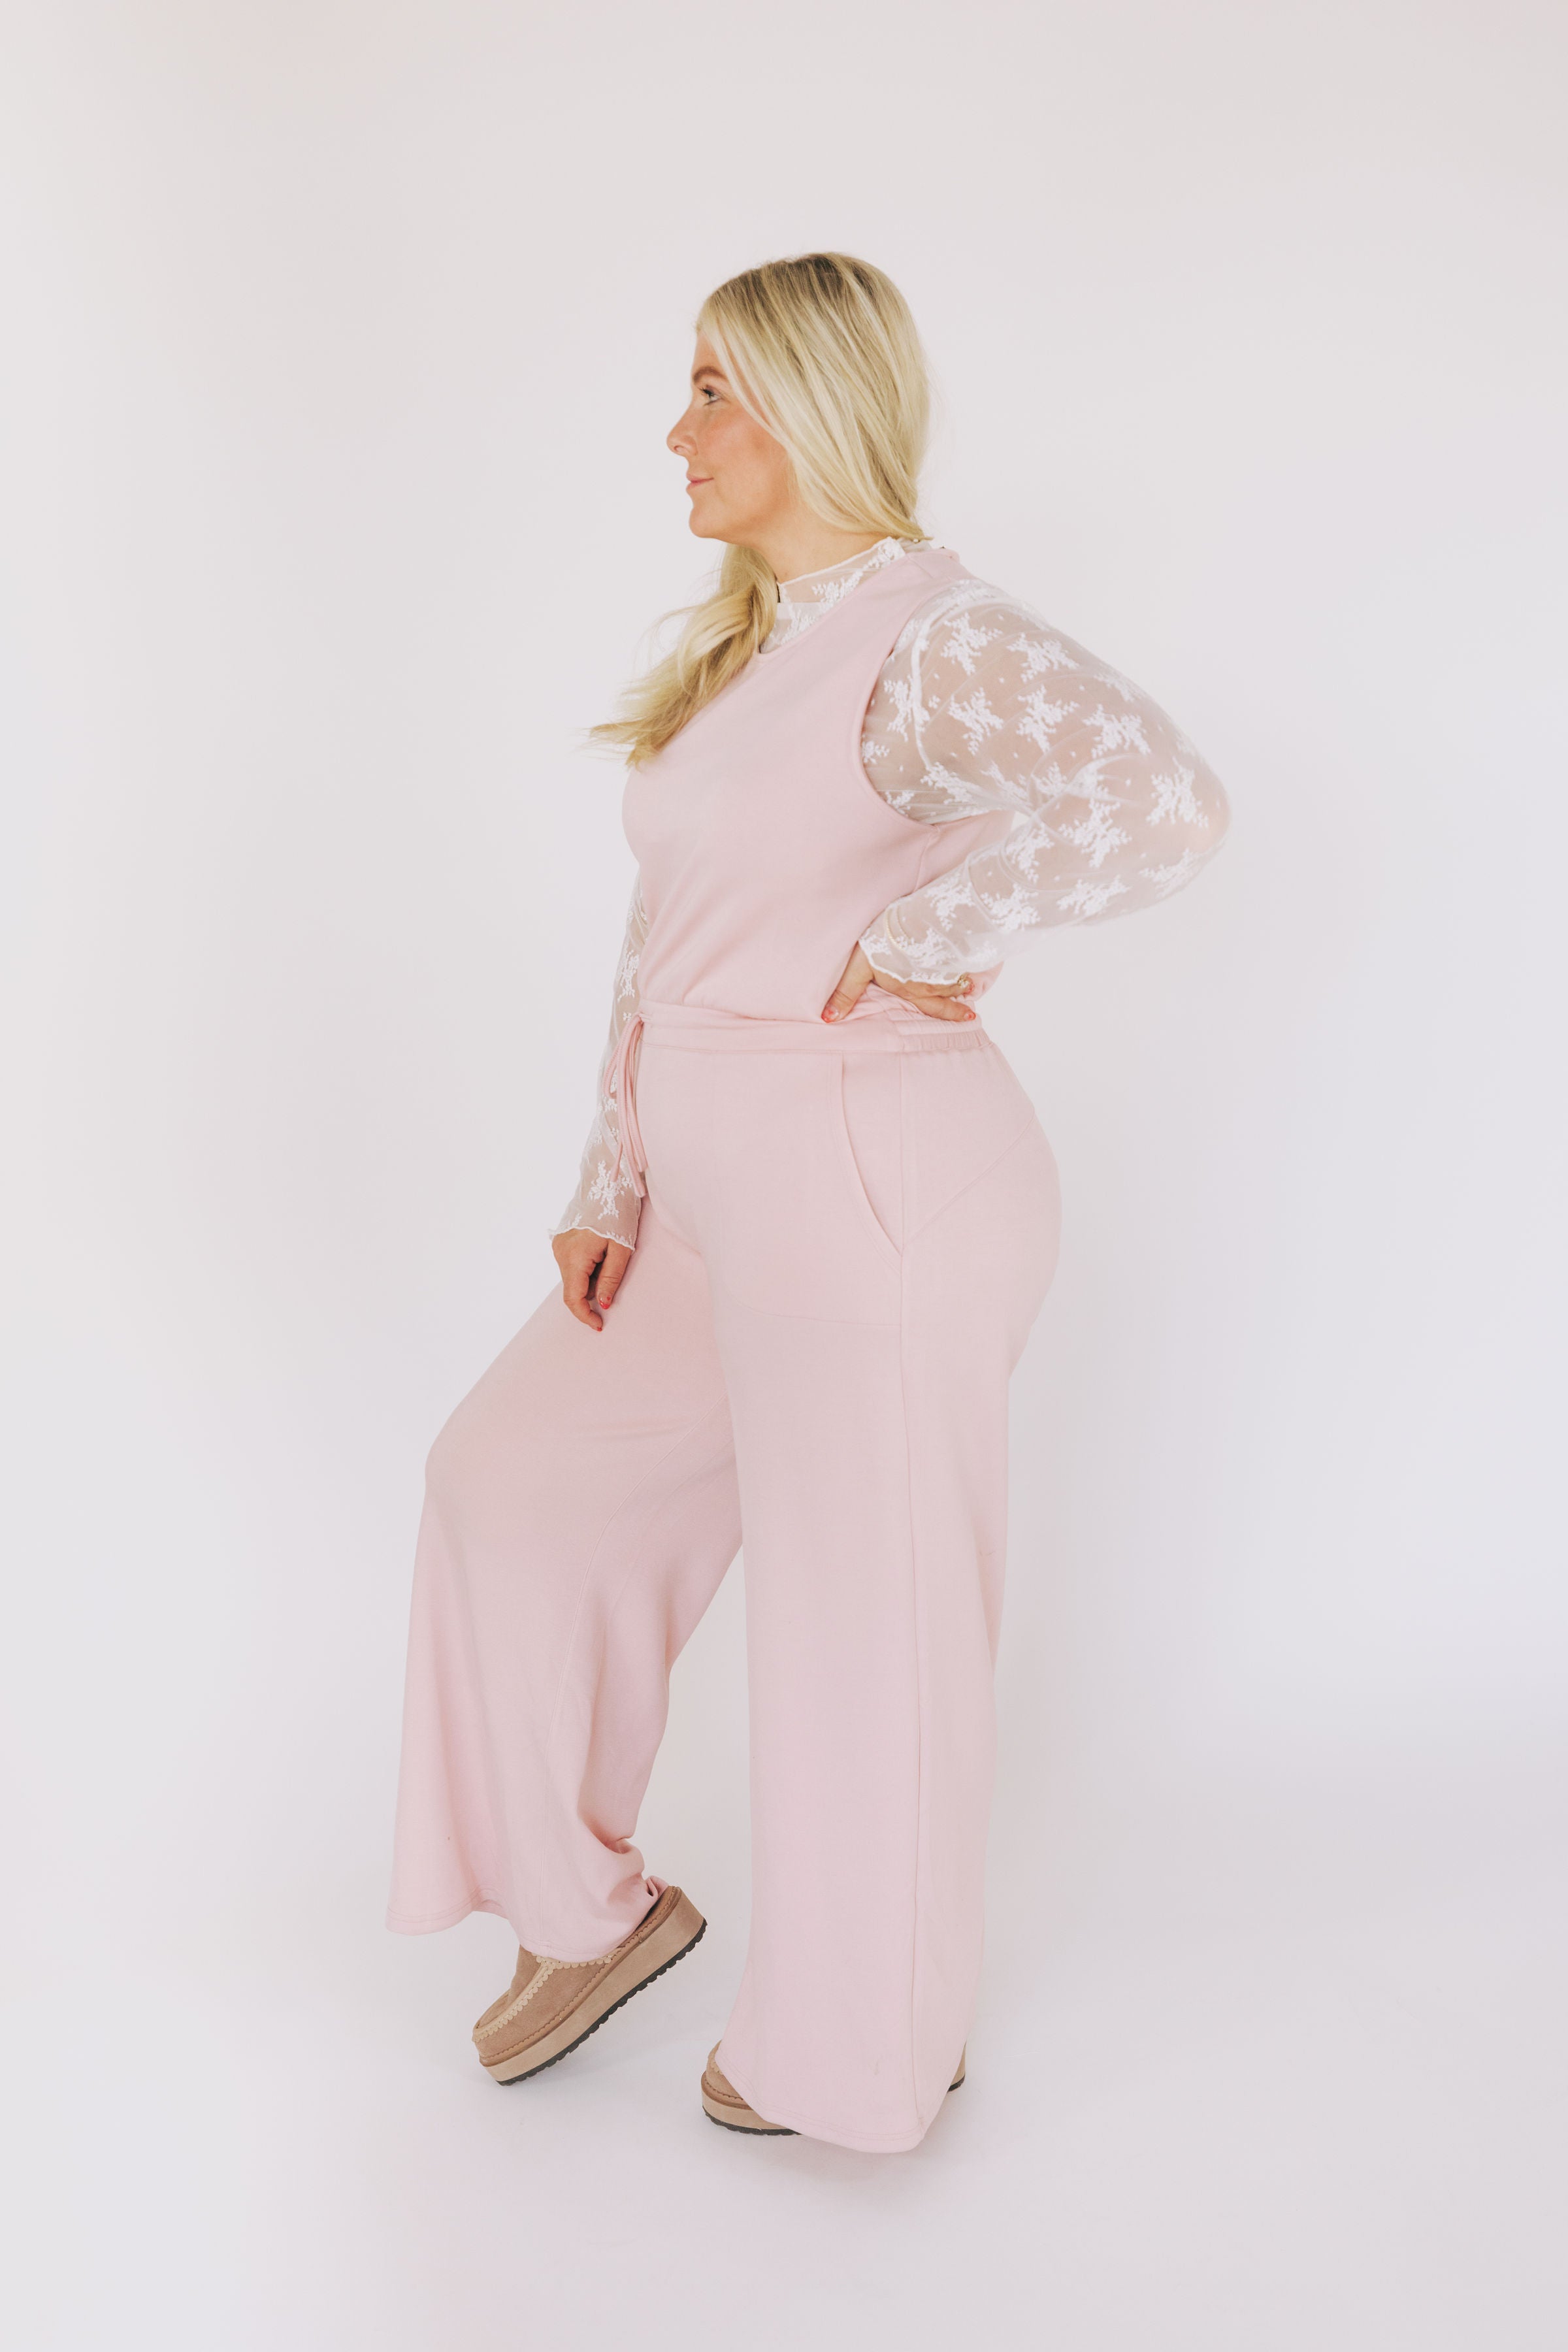 PLUS SIZE - On a Whim Jumpsuit